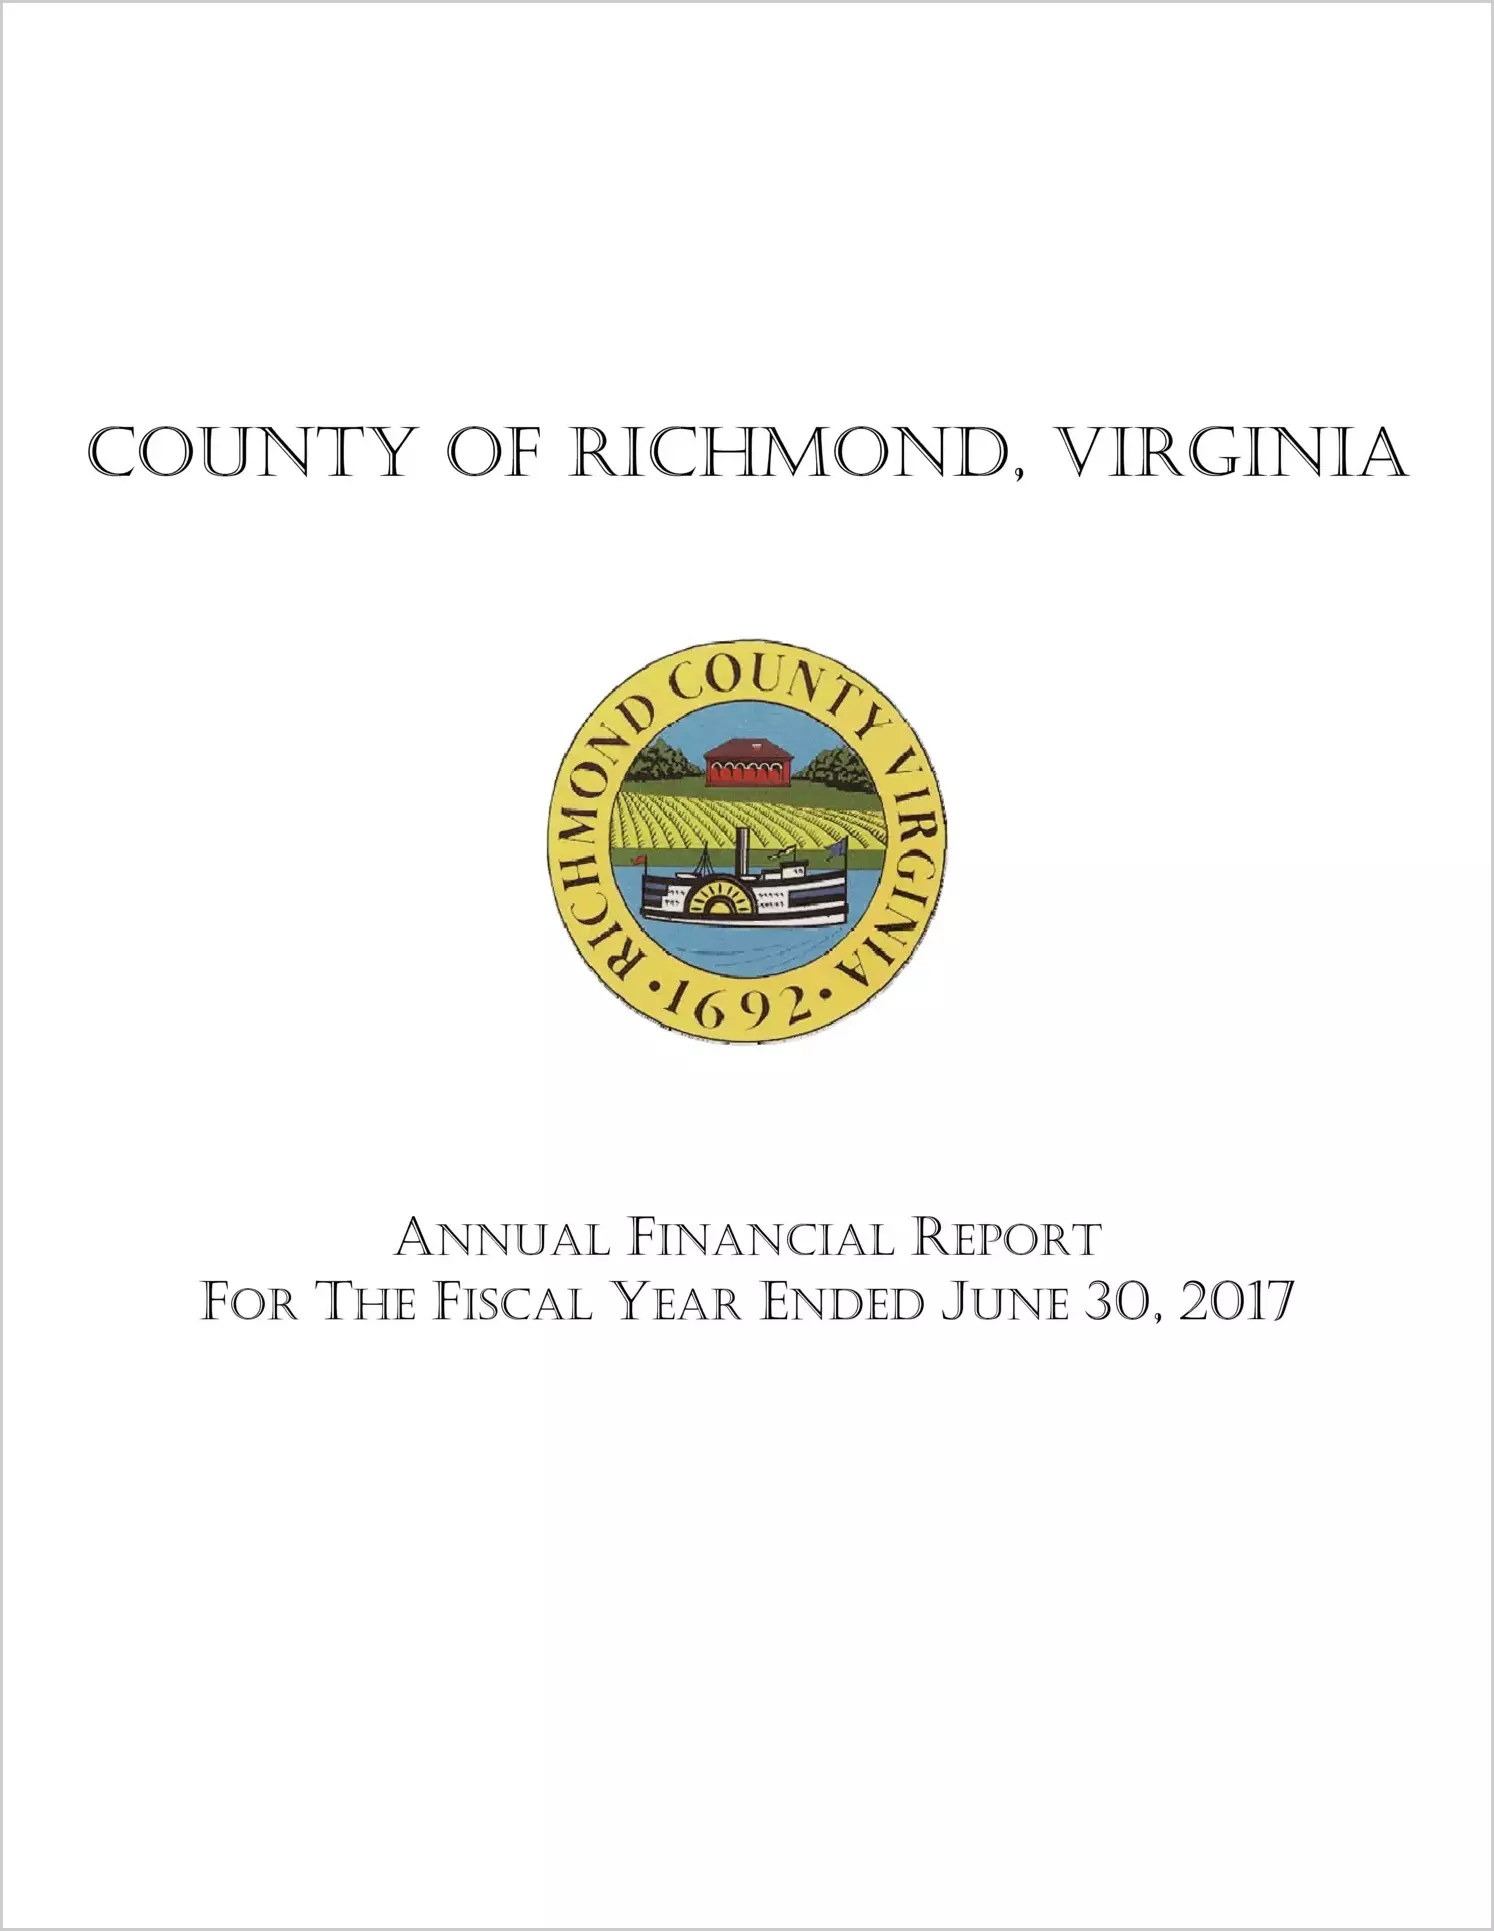 2017 Annual Financial Report for County of Richmond